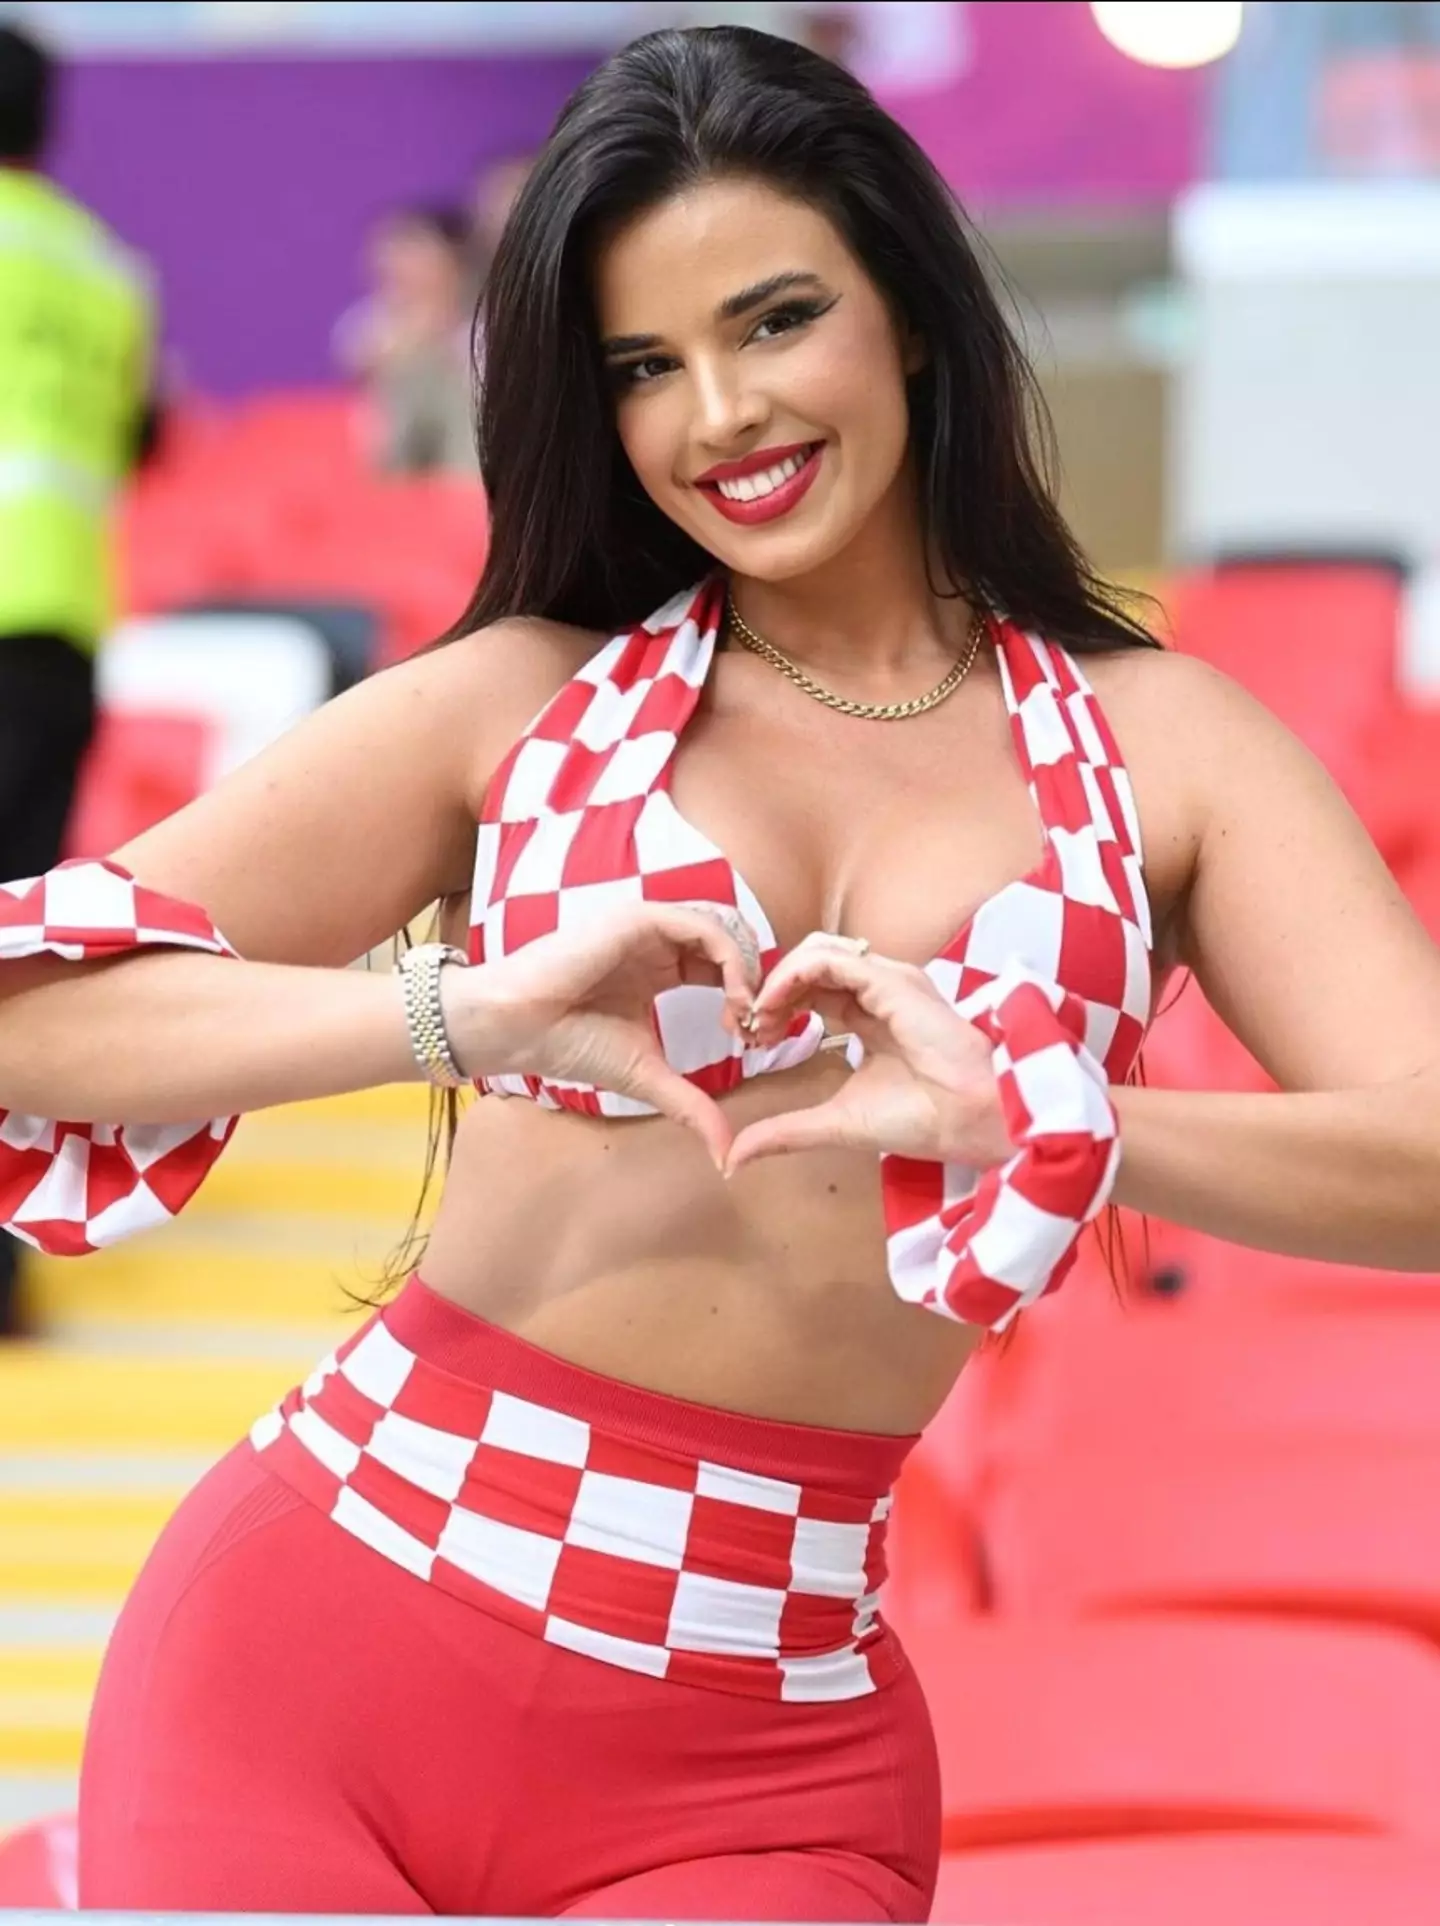 A former Miss Croatia took a stand at the World Cup by dressing the way she wanted to in Qatar.